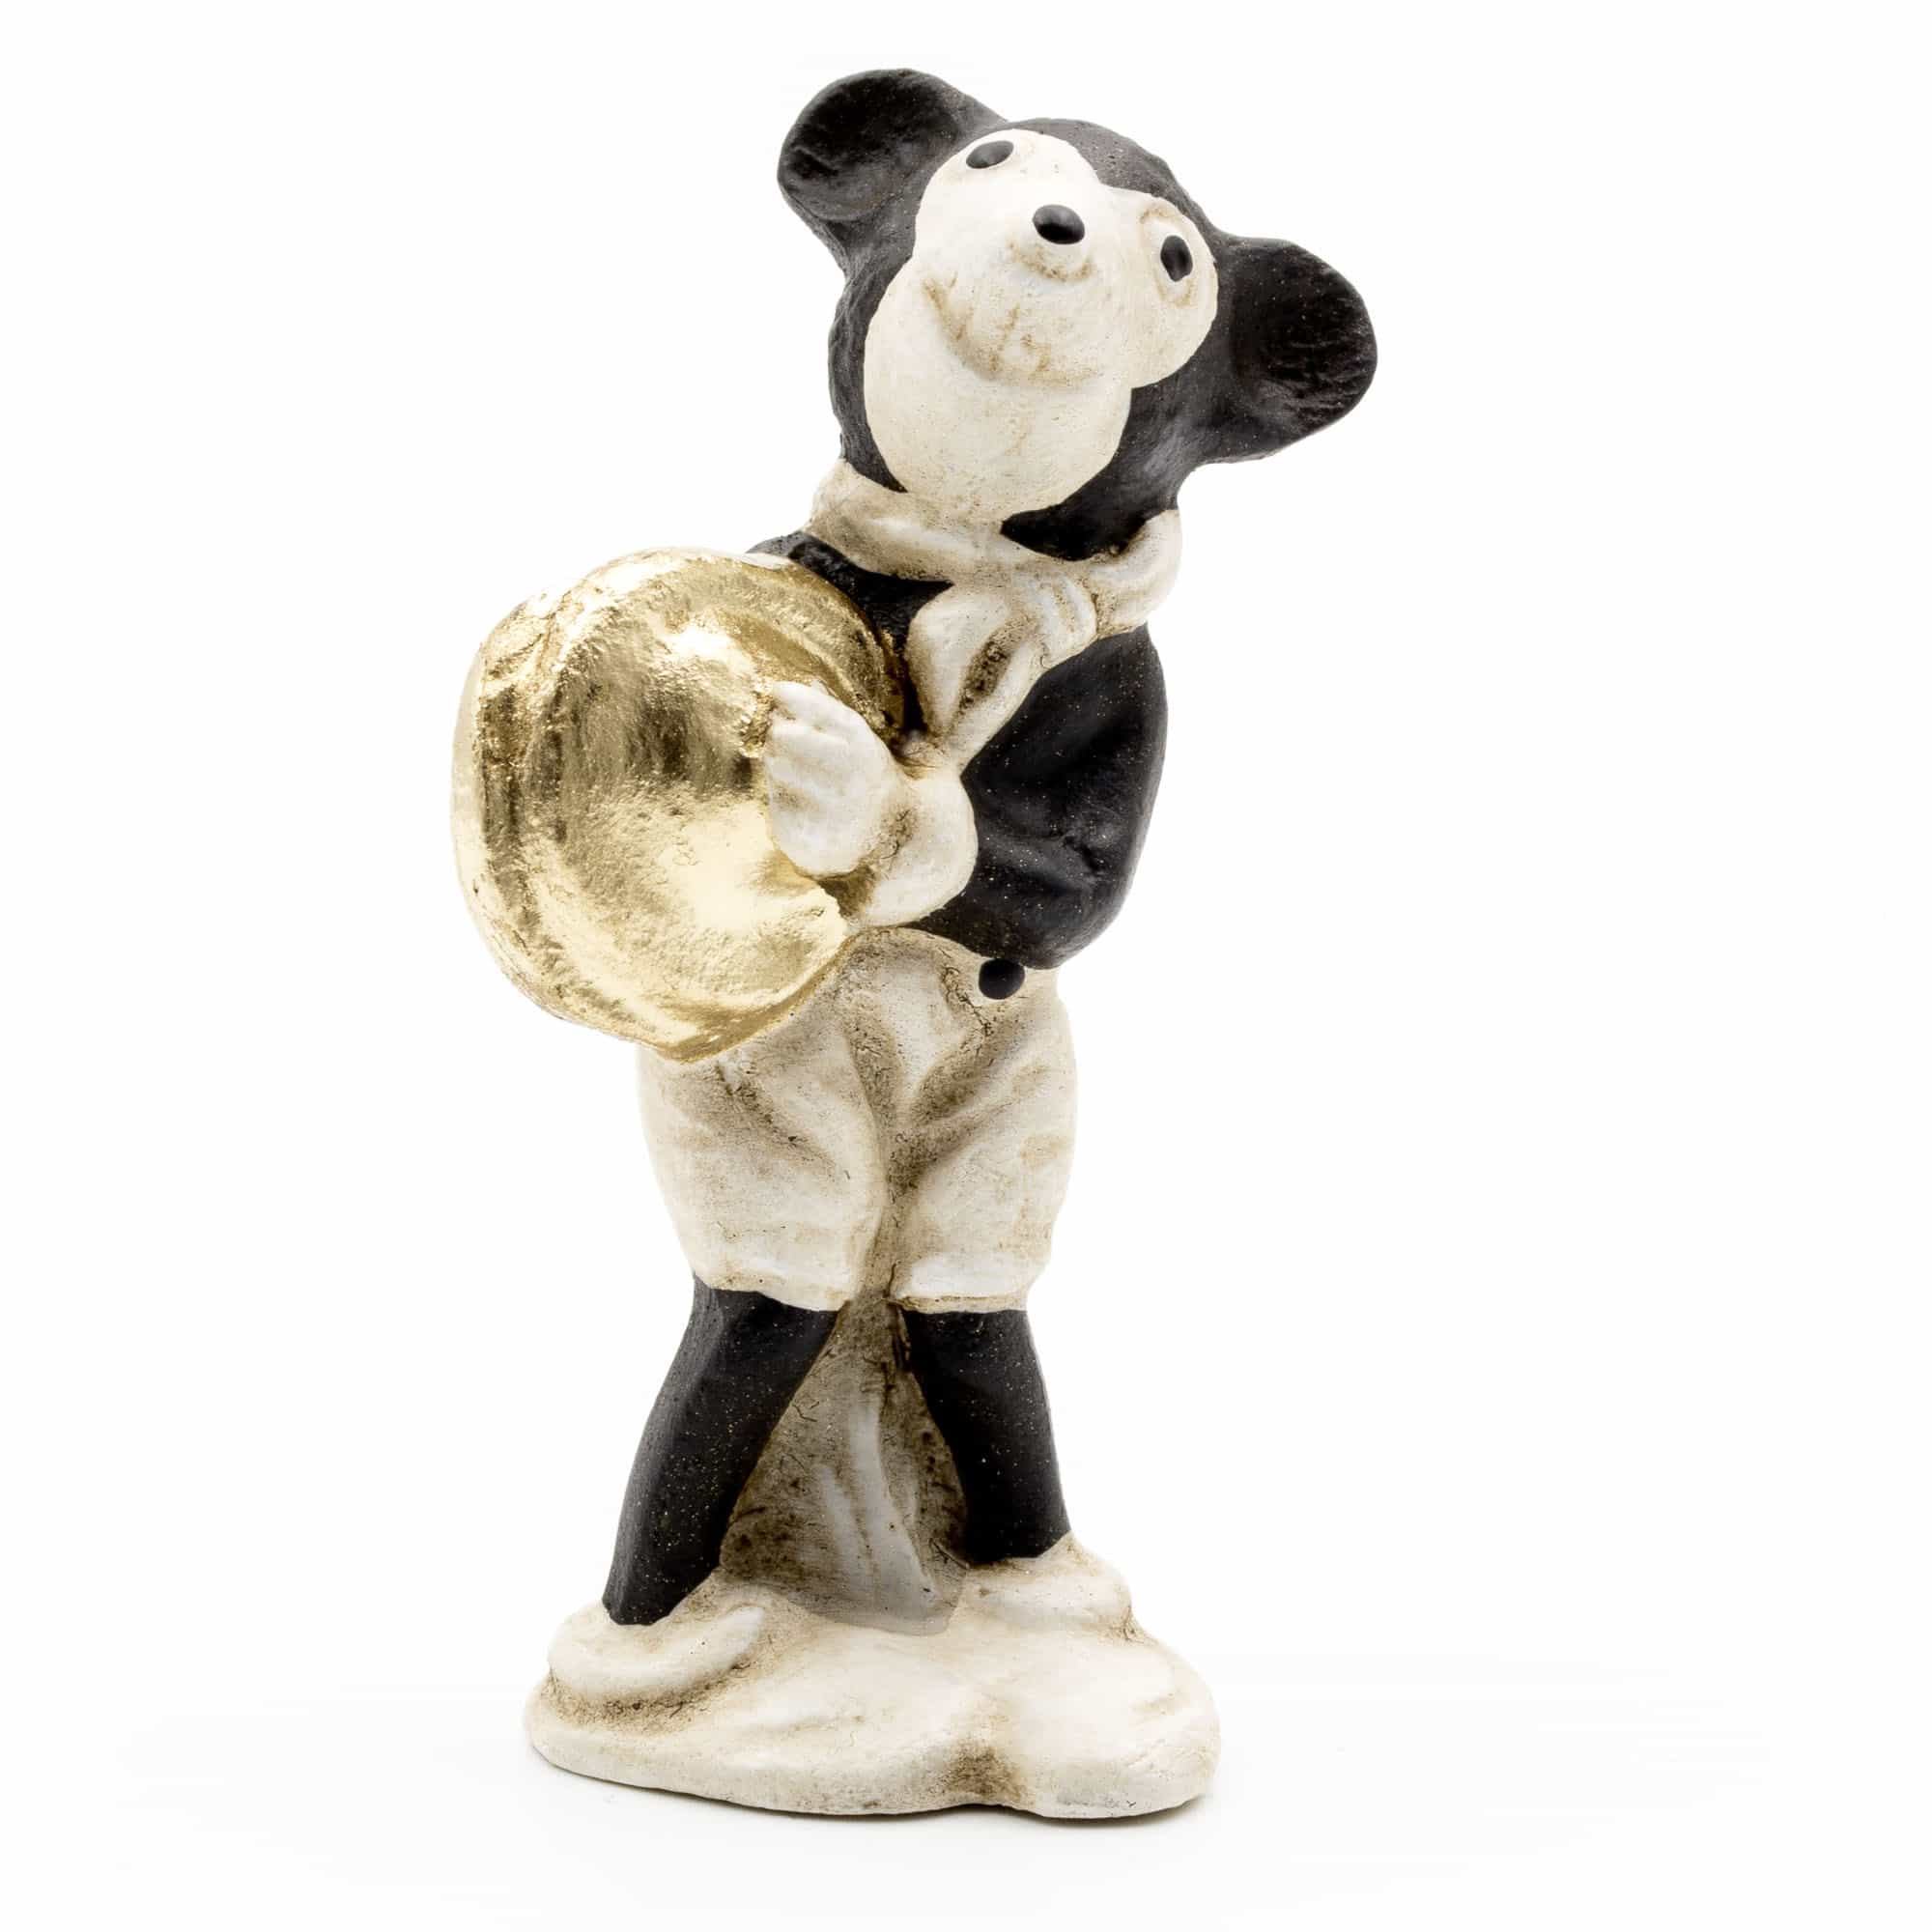 Mice Band, 8 figures in black / white painting, patinated, with gold decoration